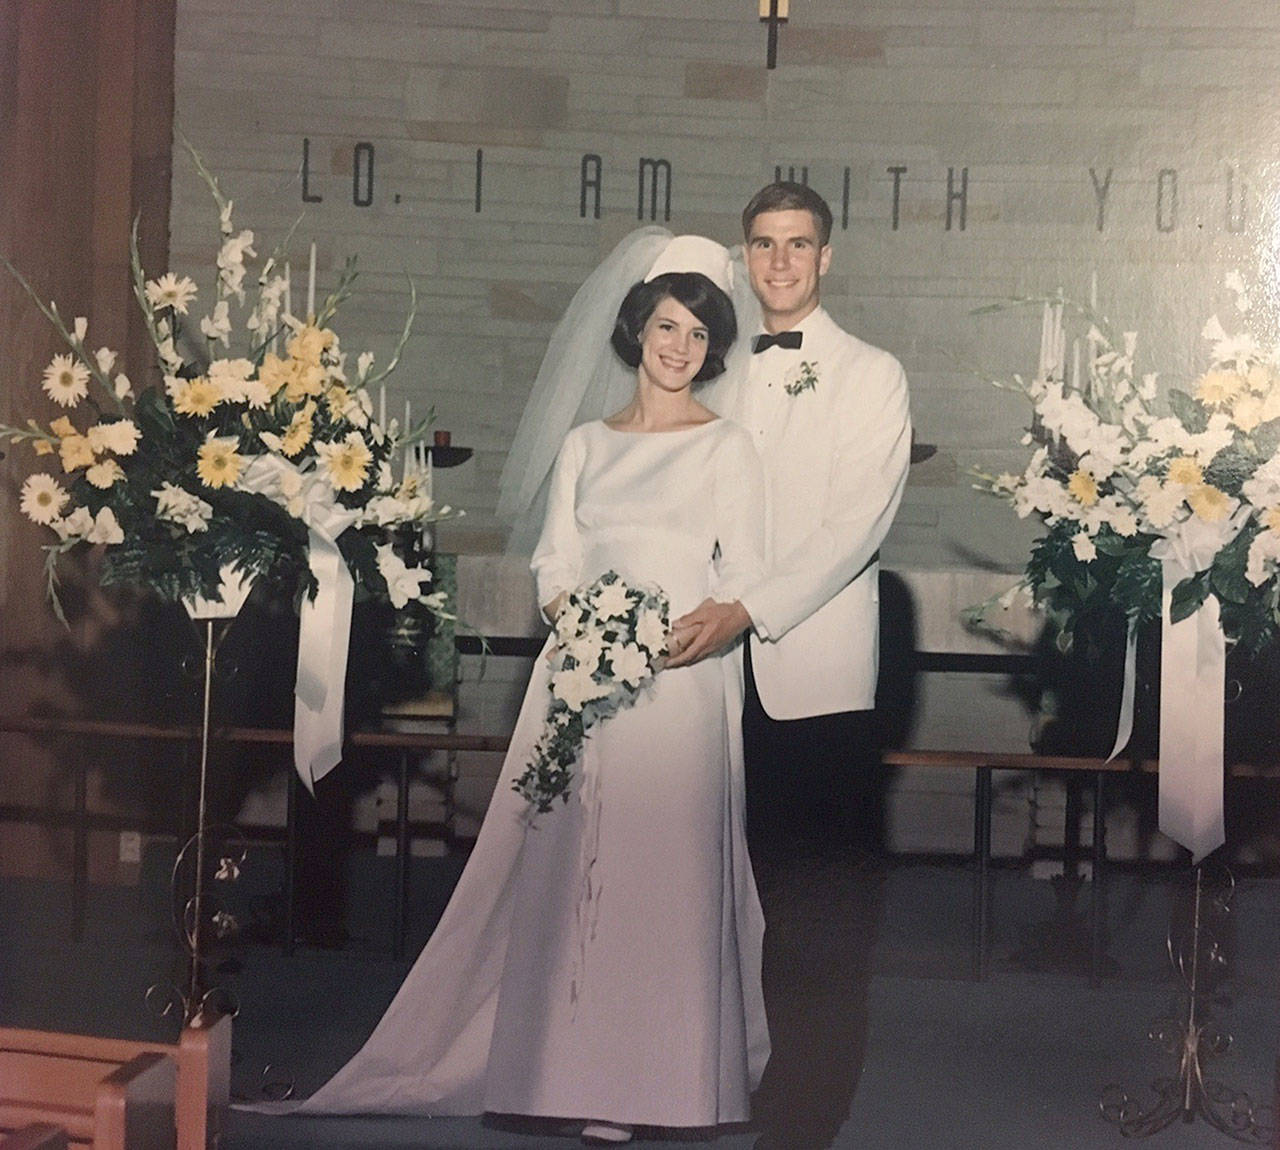 Contributed photo — Mark and Nancy Allison of Freeland were married in 1967. They’ll be celebrating their 50th wedding anniversary this weekend.